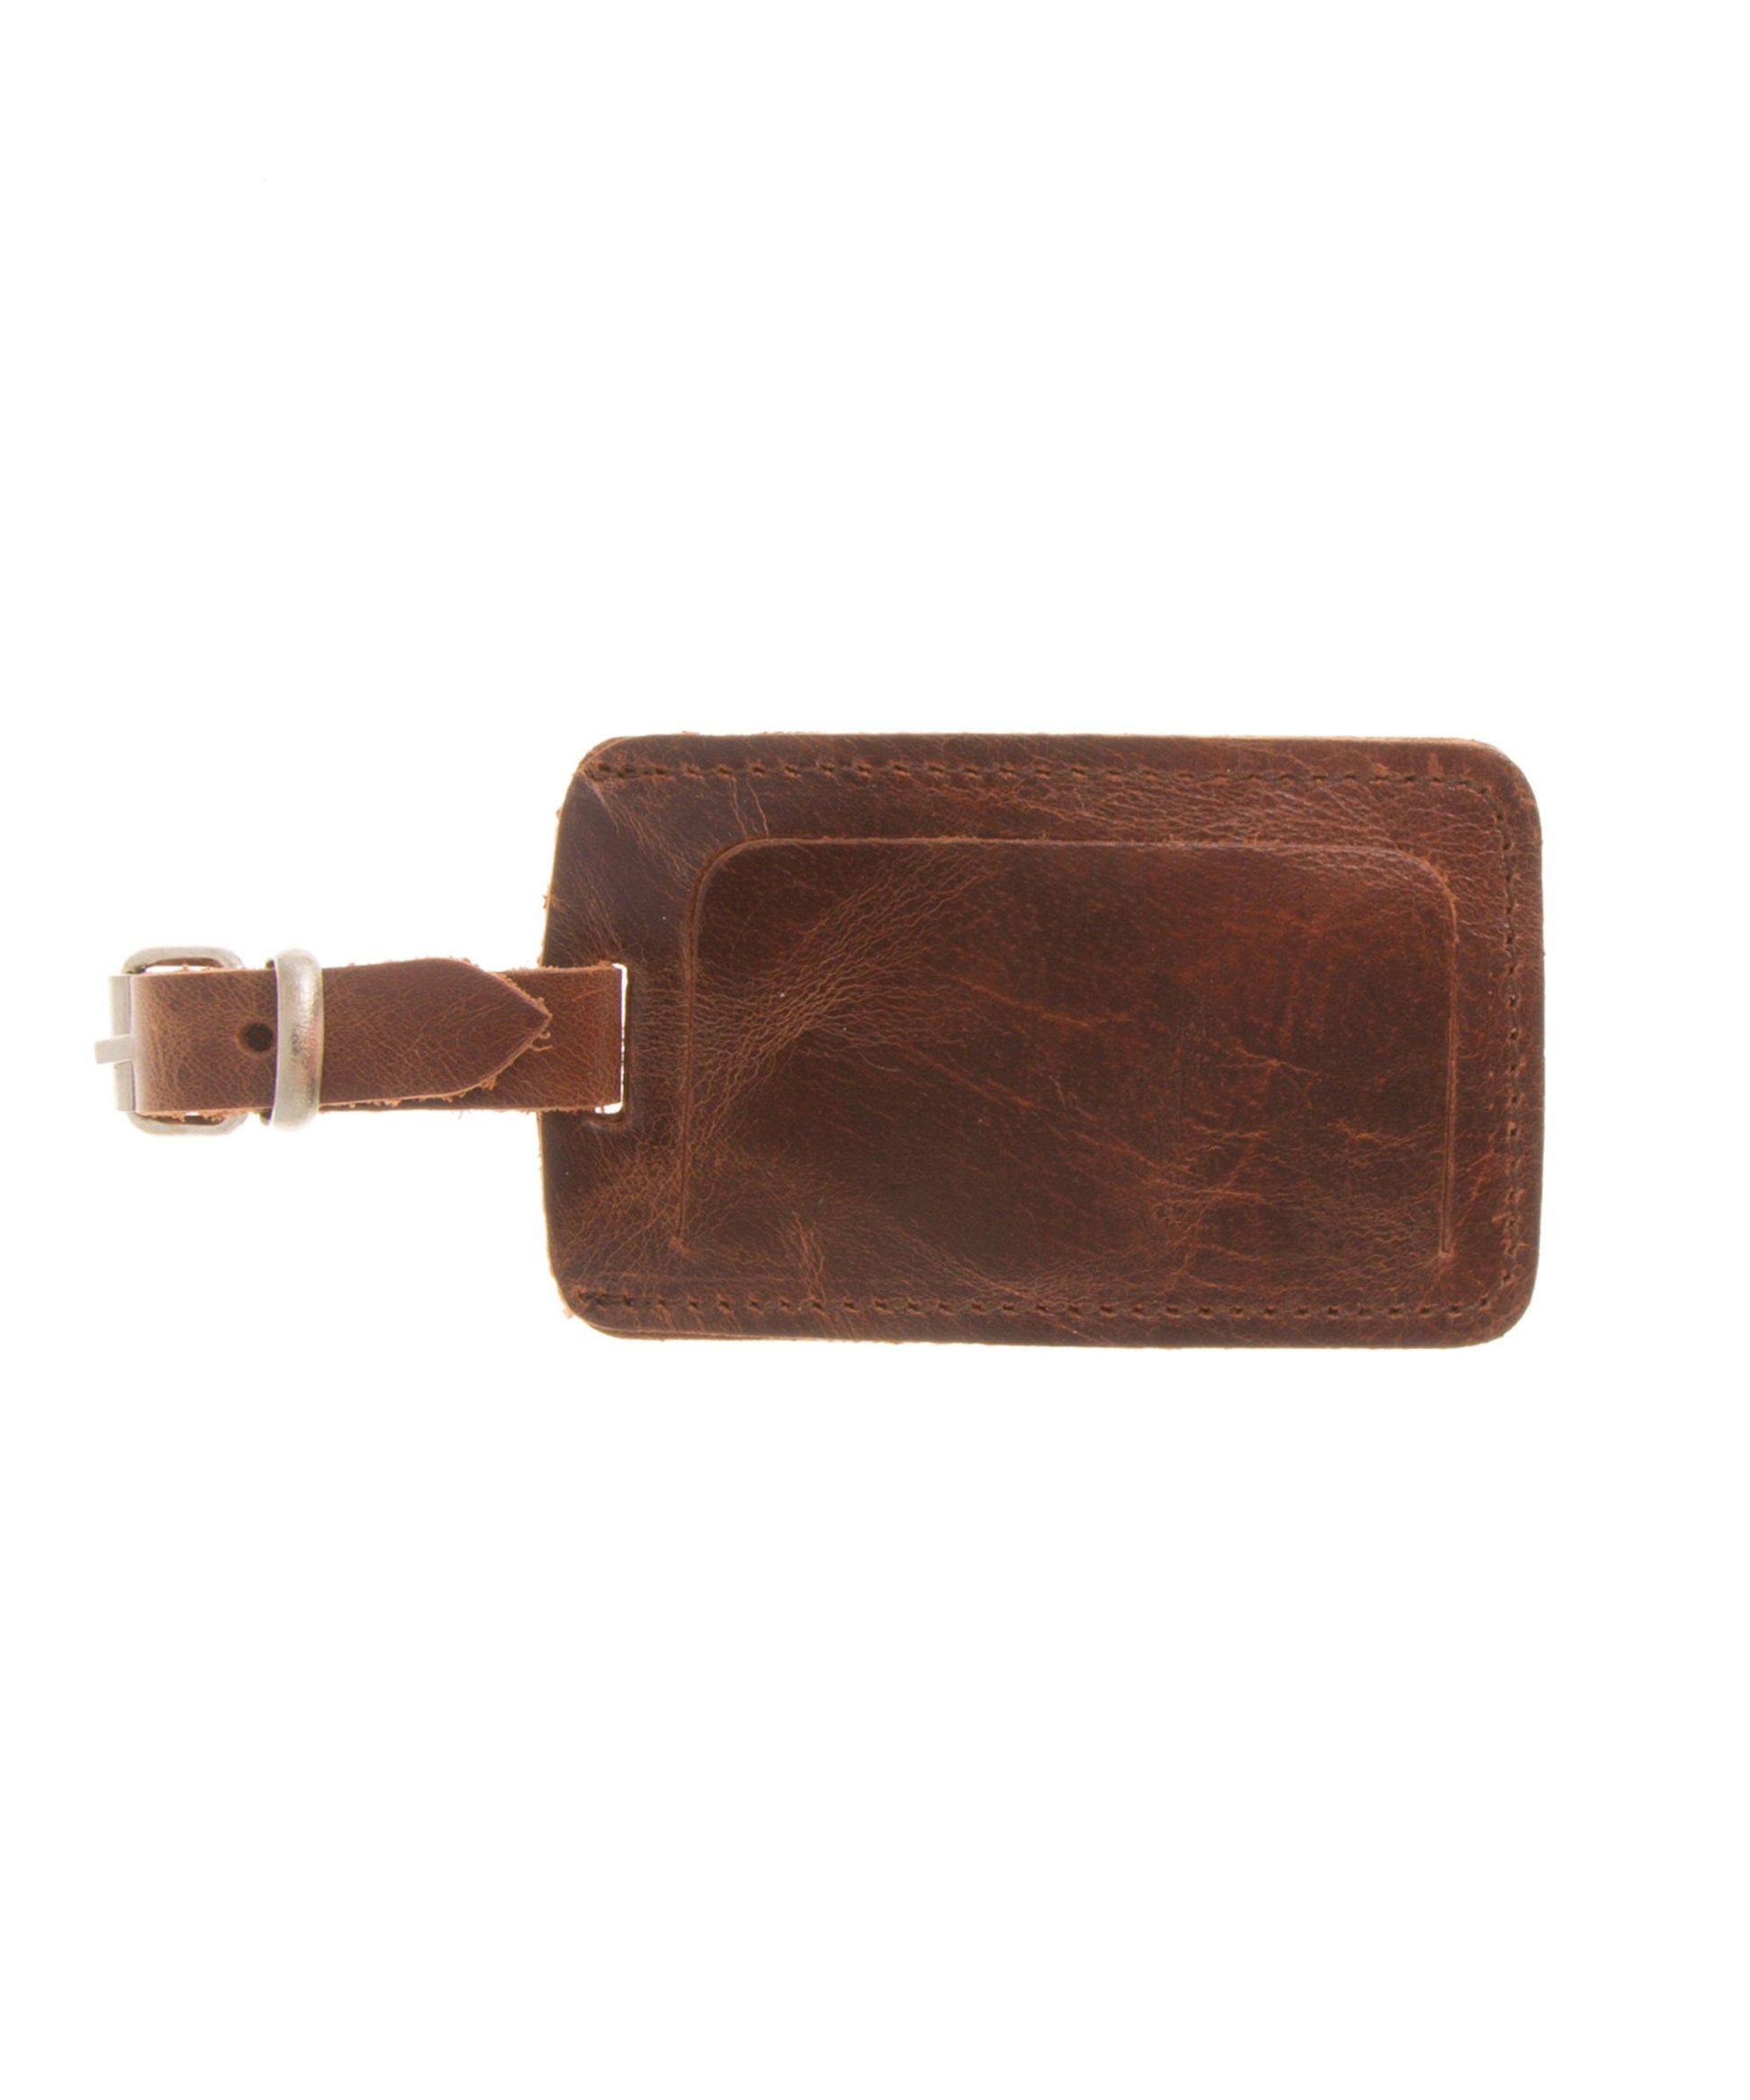 Natural leather luggage tag, Baggage label name, Unique suitcase tag, Bespoke luggage tag